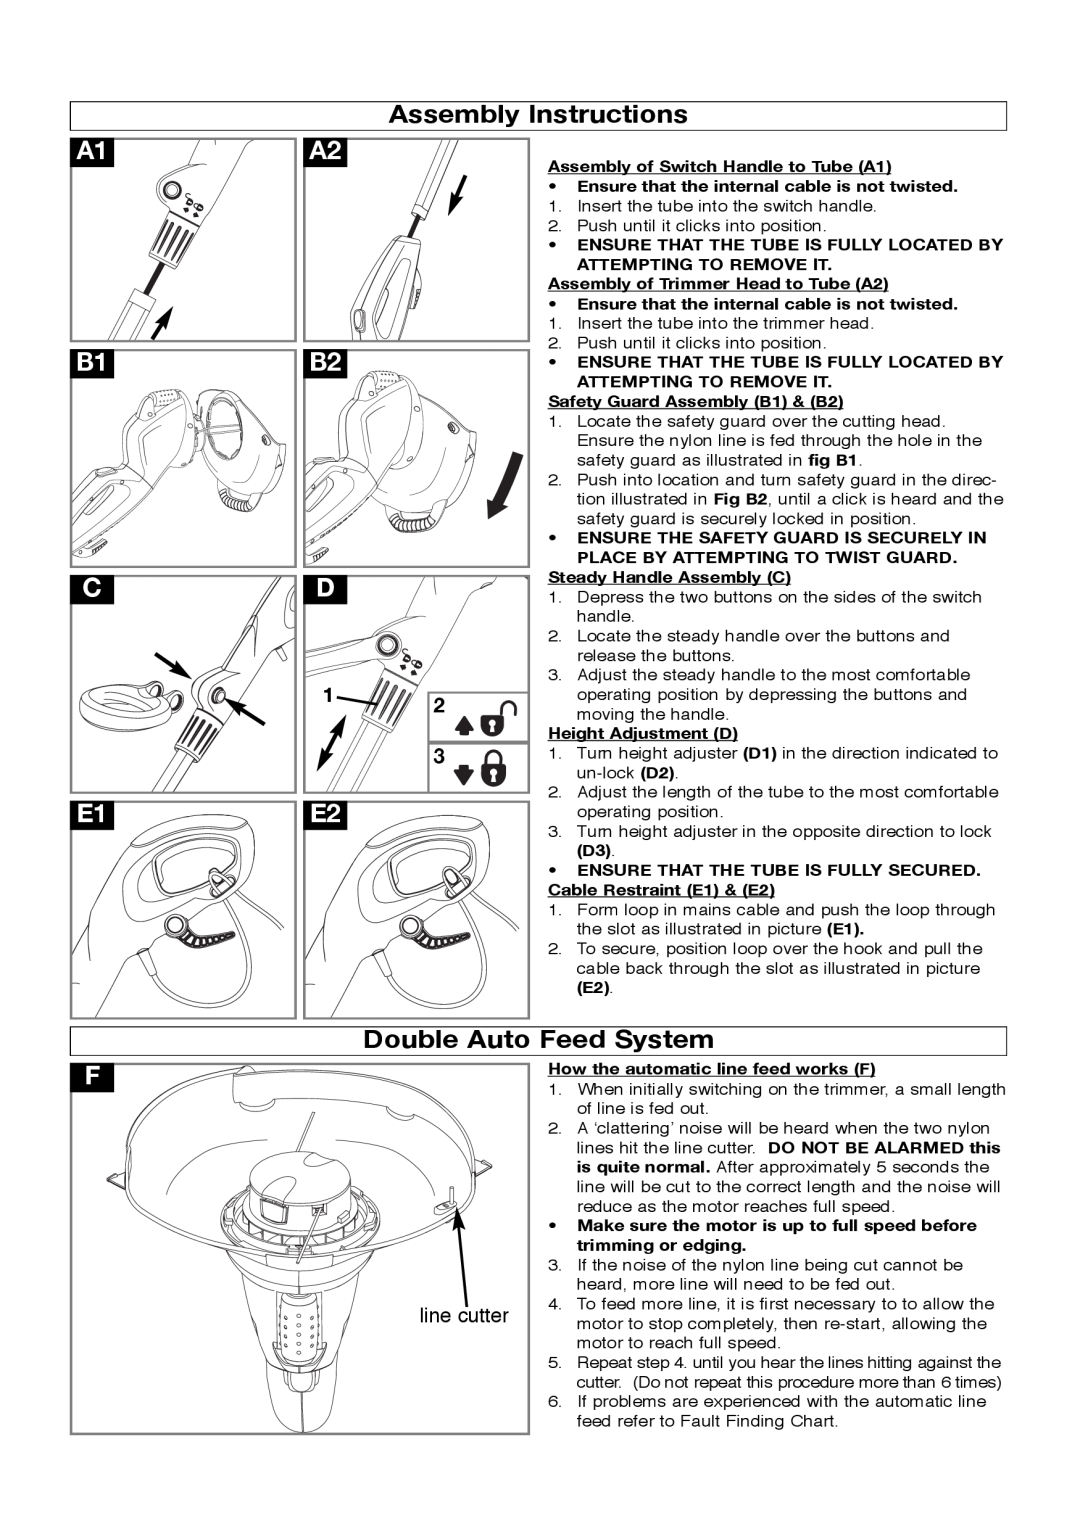 Flymo 511967501 manual Assembly Instructions, Double Auto Feed System, line cutter 